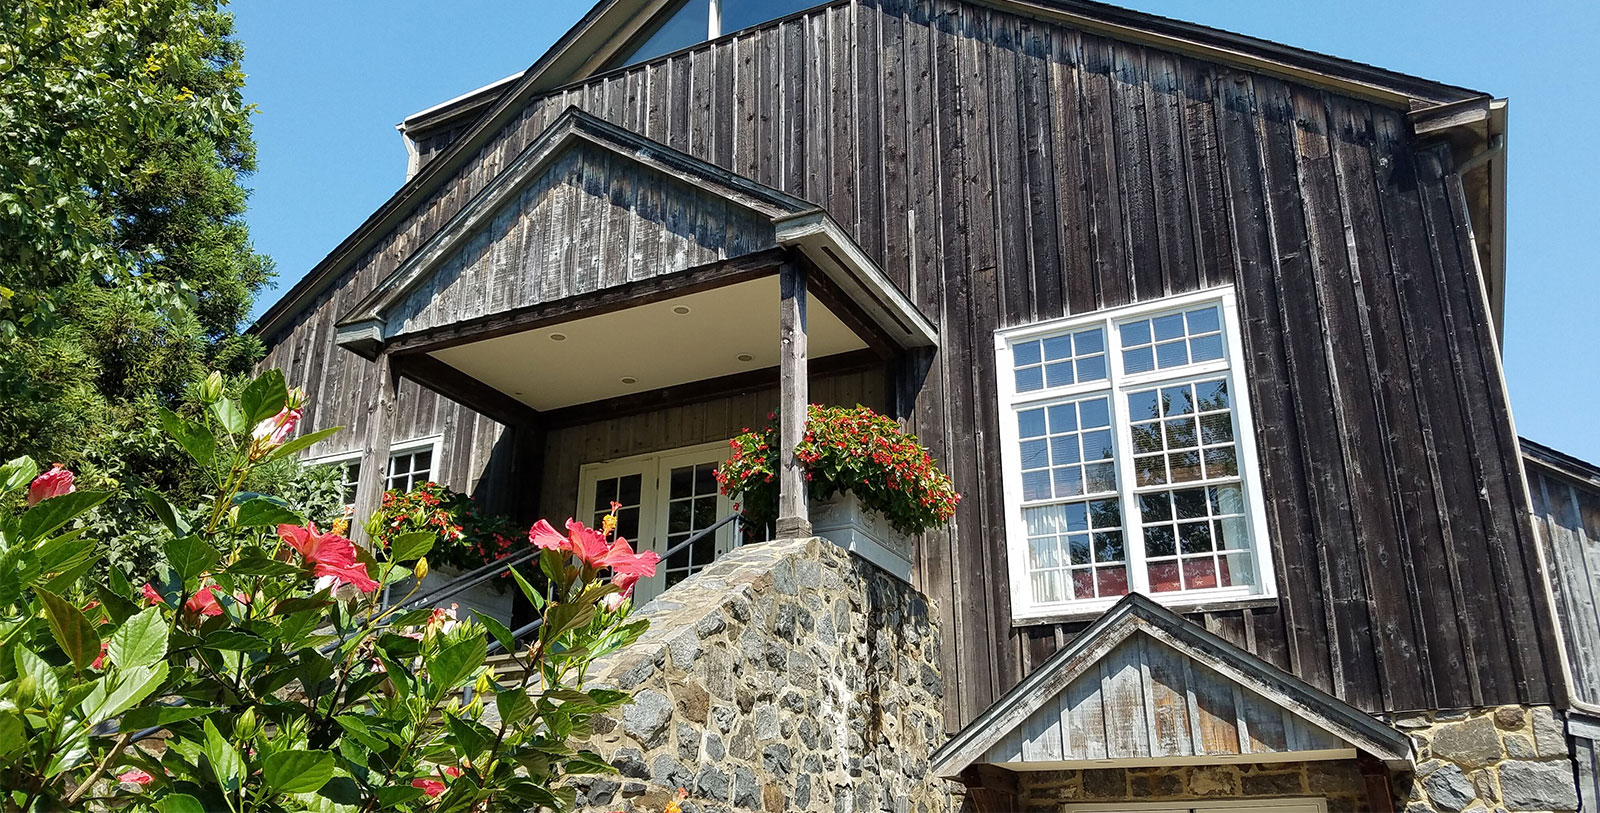 Image of Barn with Flowers The Inn at Montchanin Village, 1799, Member of Historic Hotels of America, in Montchanin, Delaware, Hot Deals